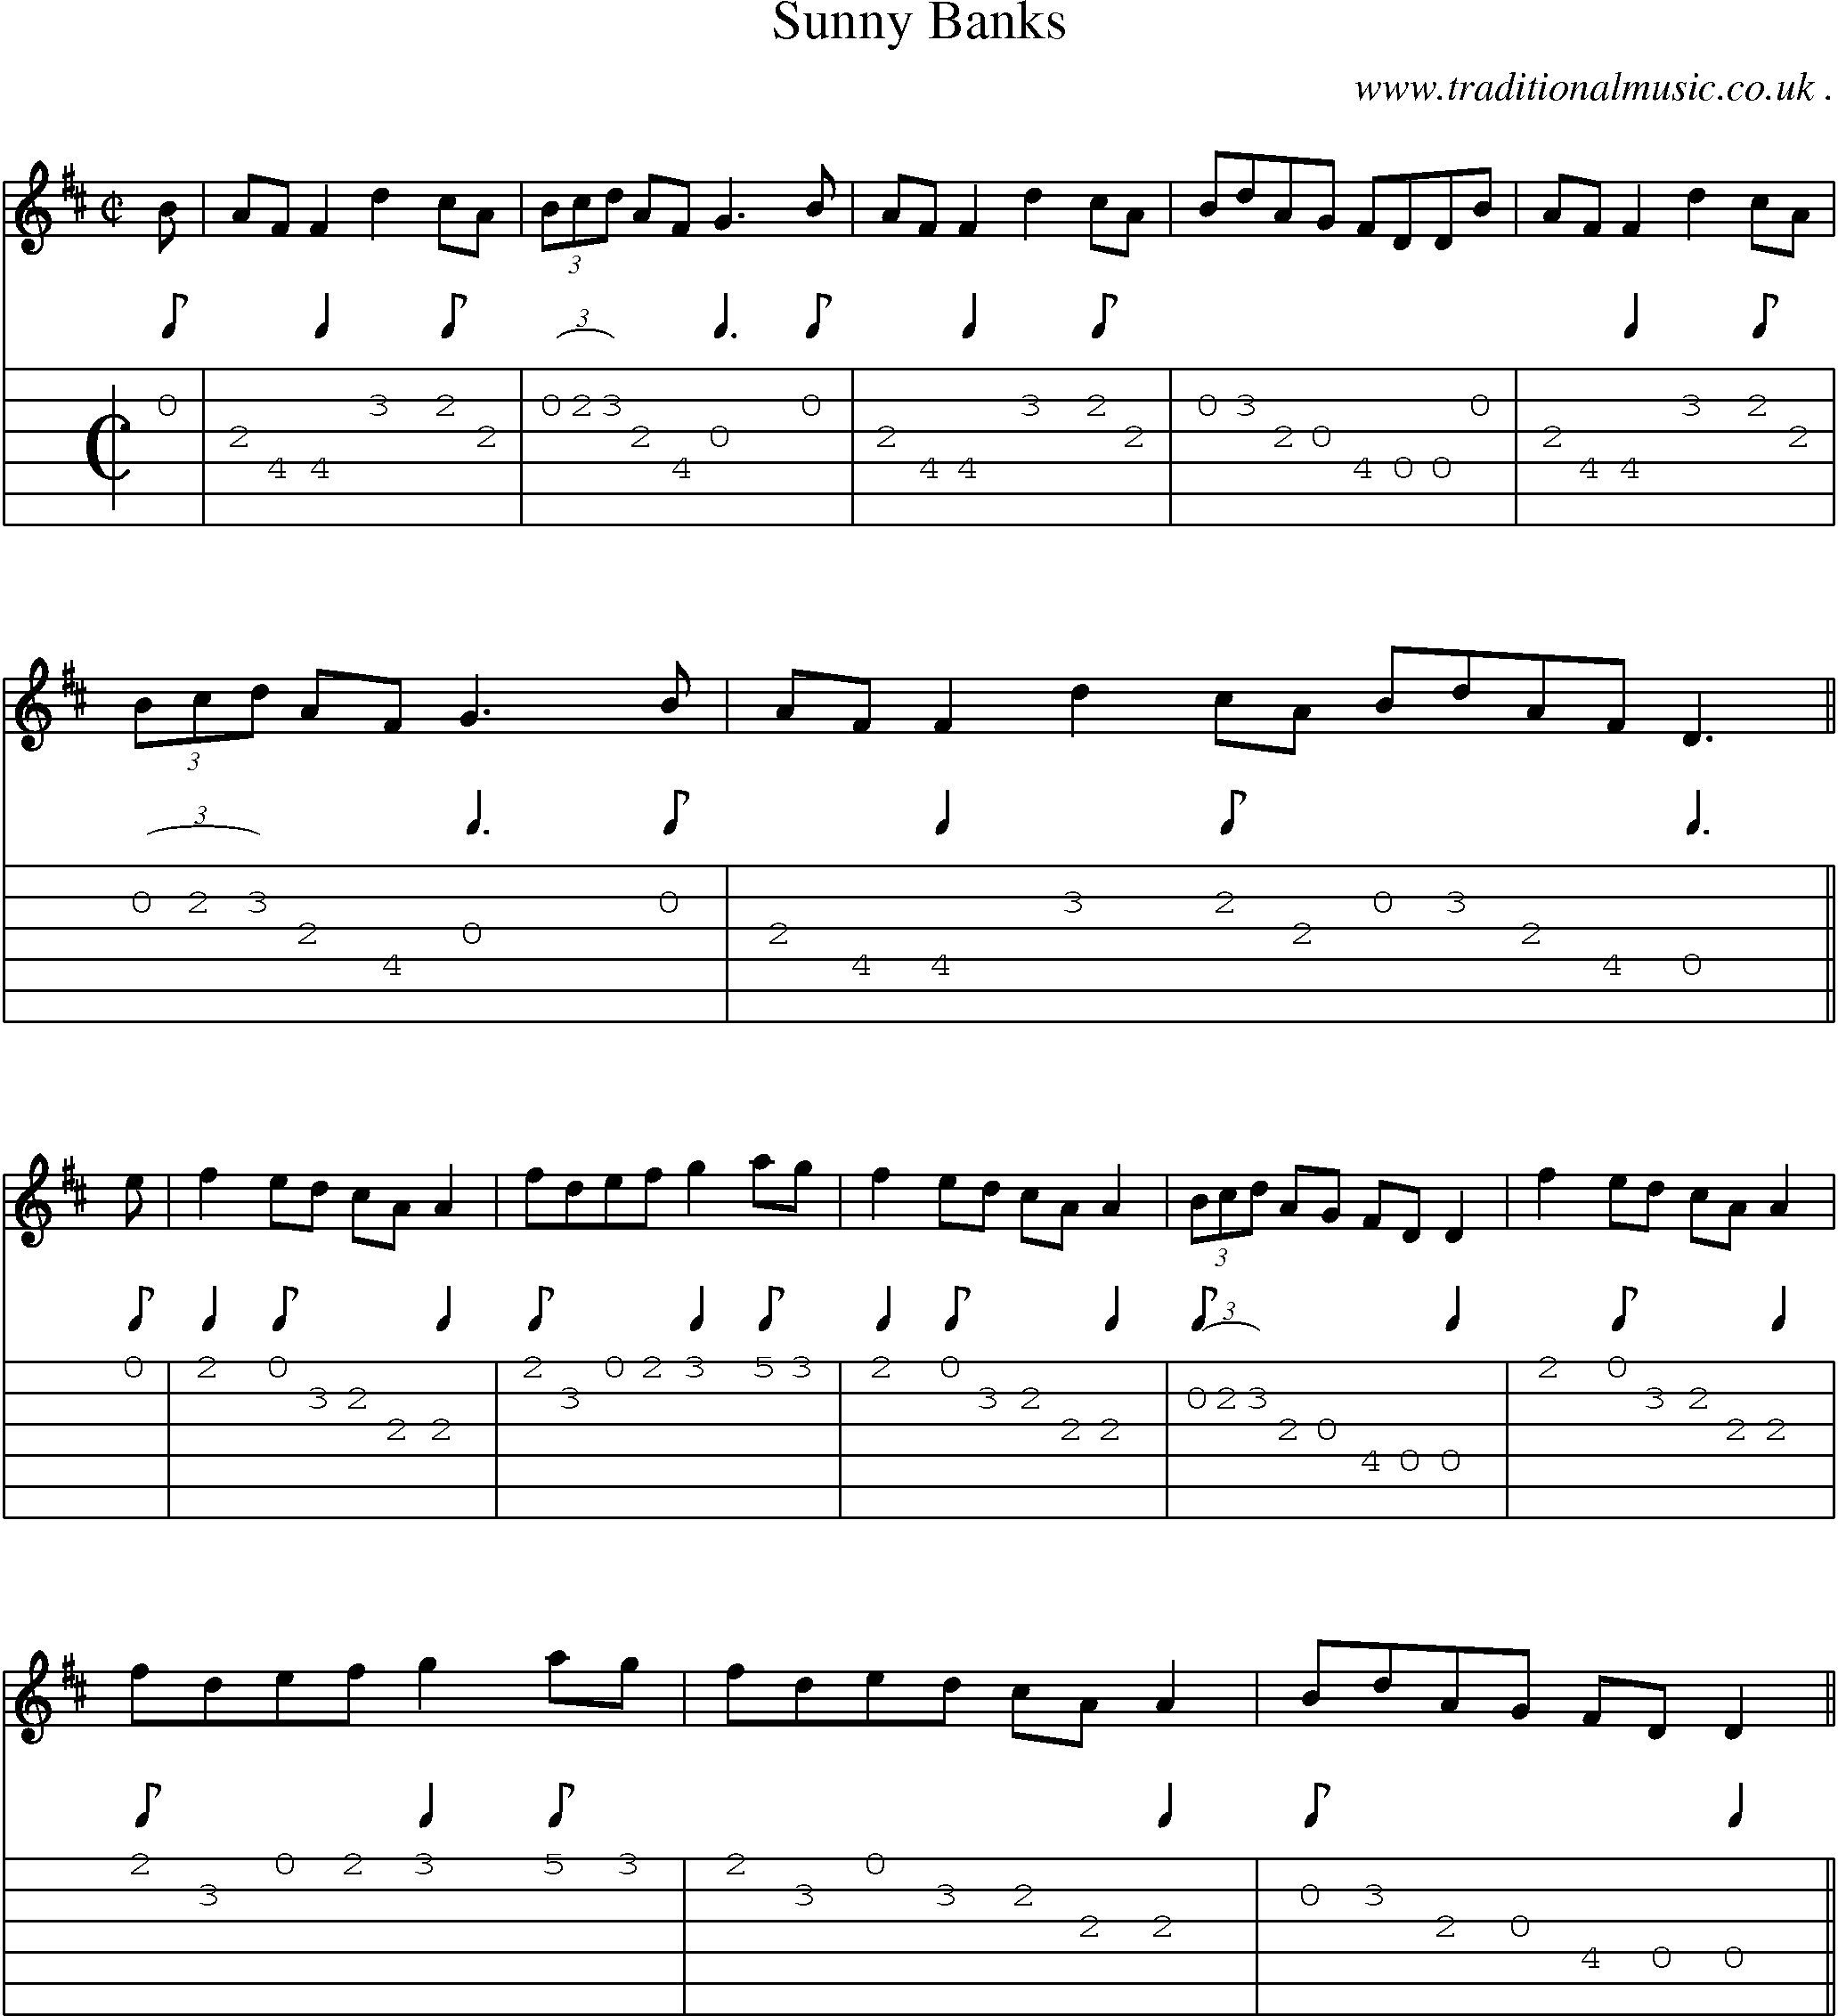 Sheet-Music and Guitar Tabs for Sunny Banks